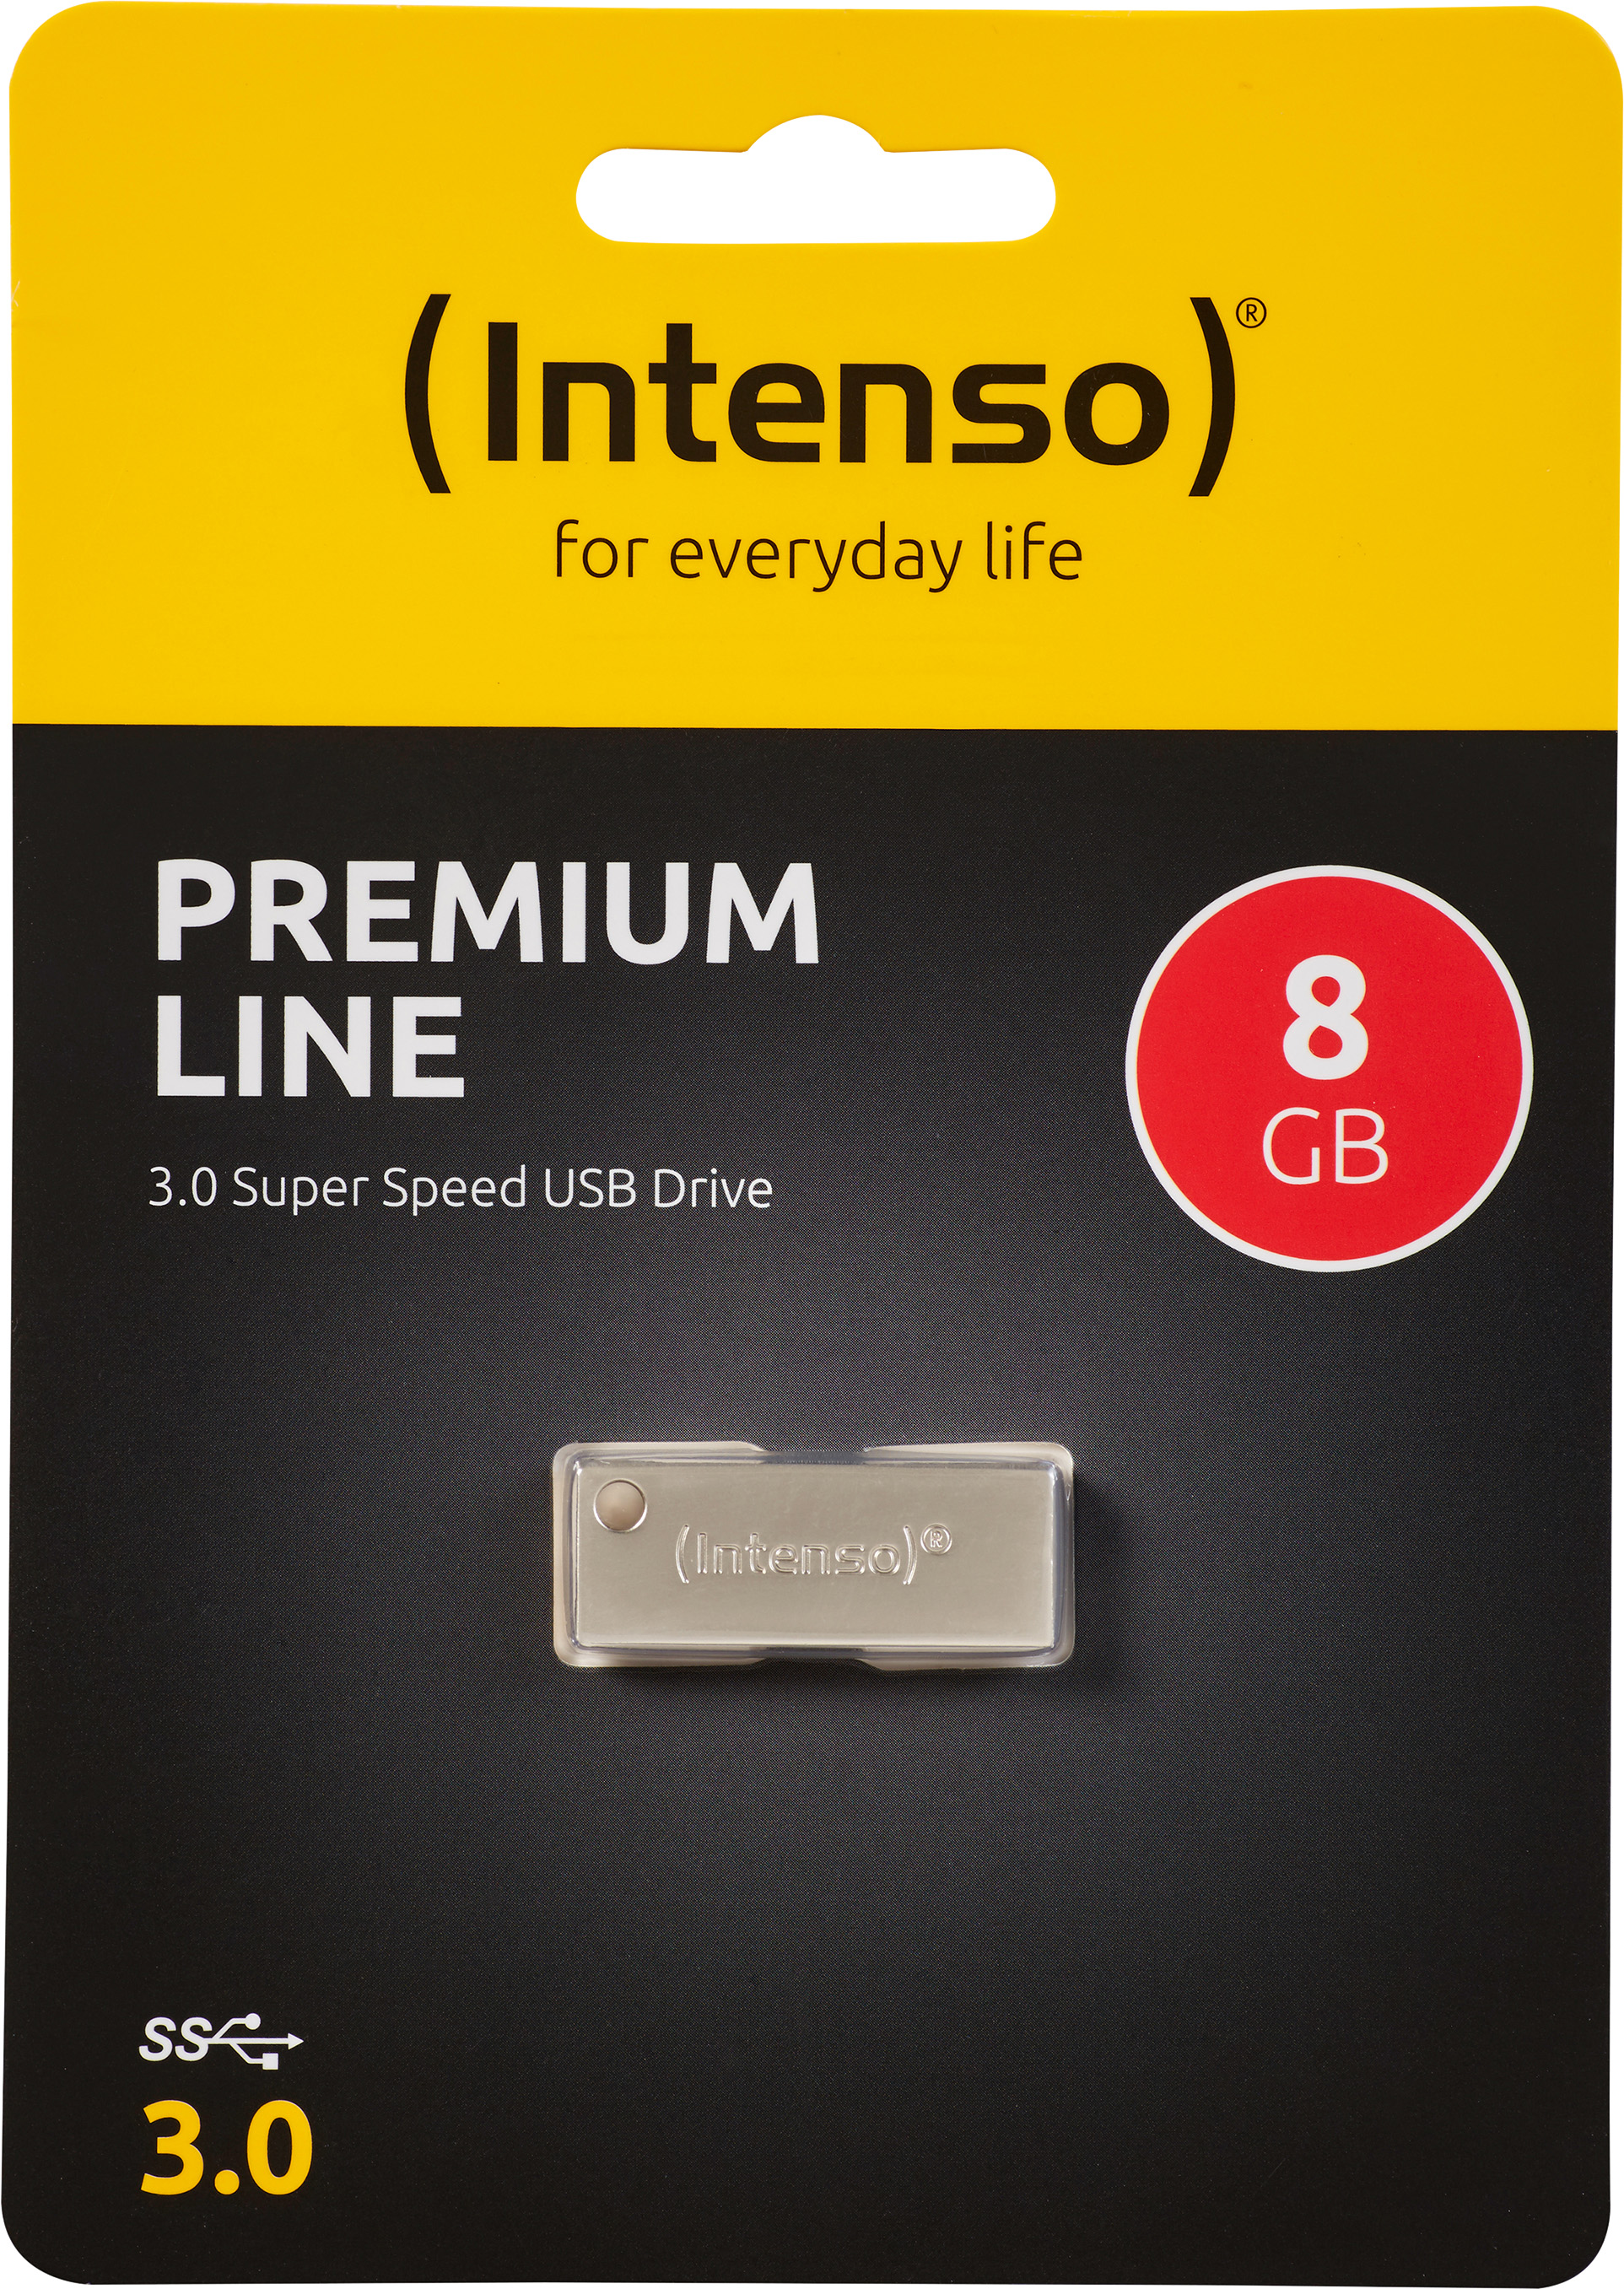 Intenso USB 3.0 Stick 8GB, Premium Line, Metall, silber Typ-A, (R) 100MB/s, Retail-Blister